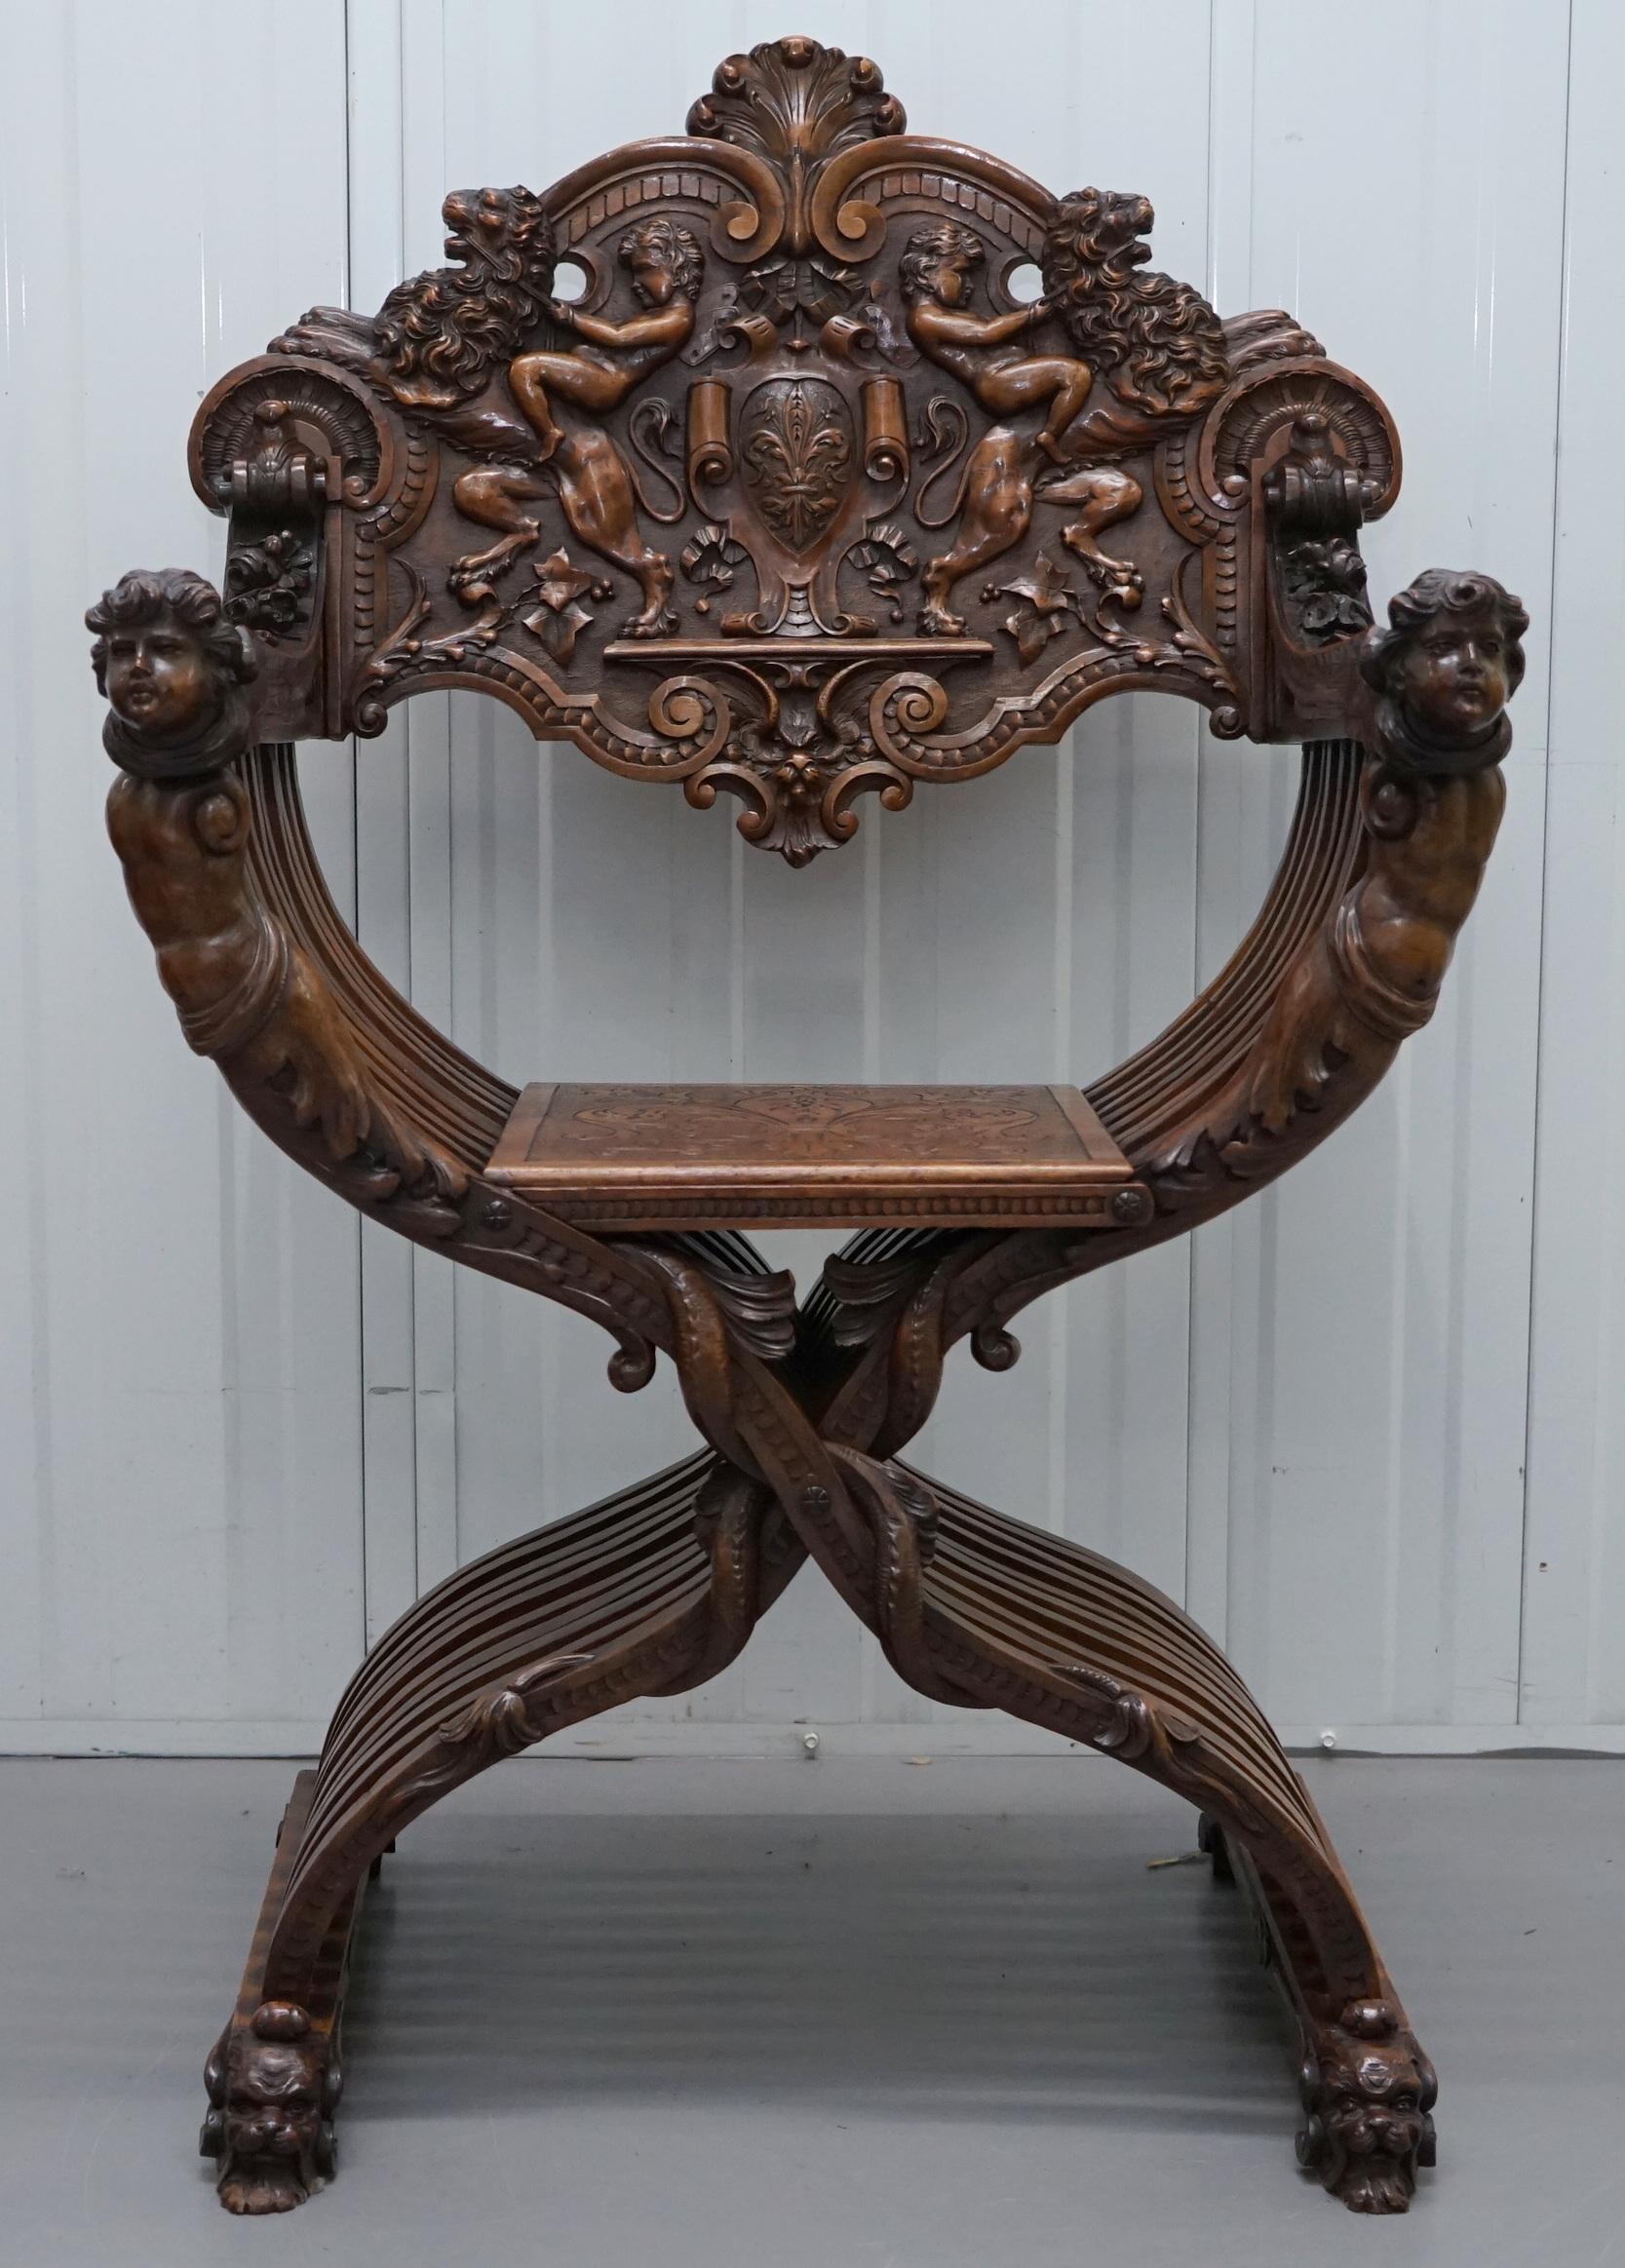 We are delighted to offer for sale this absolutely stunning heavily carved circa 1800 Savonarola armchair in solid walnut

This is one of the most decorative and heavily carved with extreme detail armchairs I have ever seen, you have Lion riding